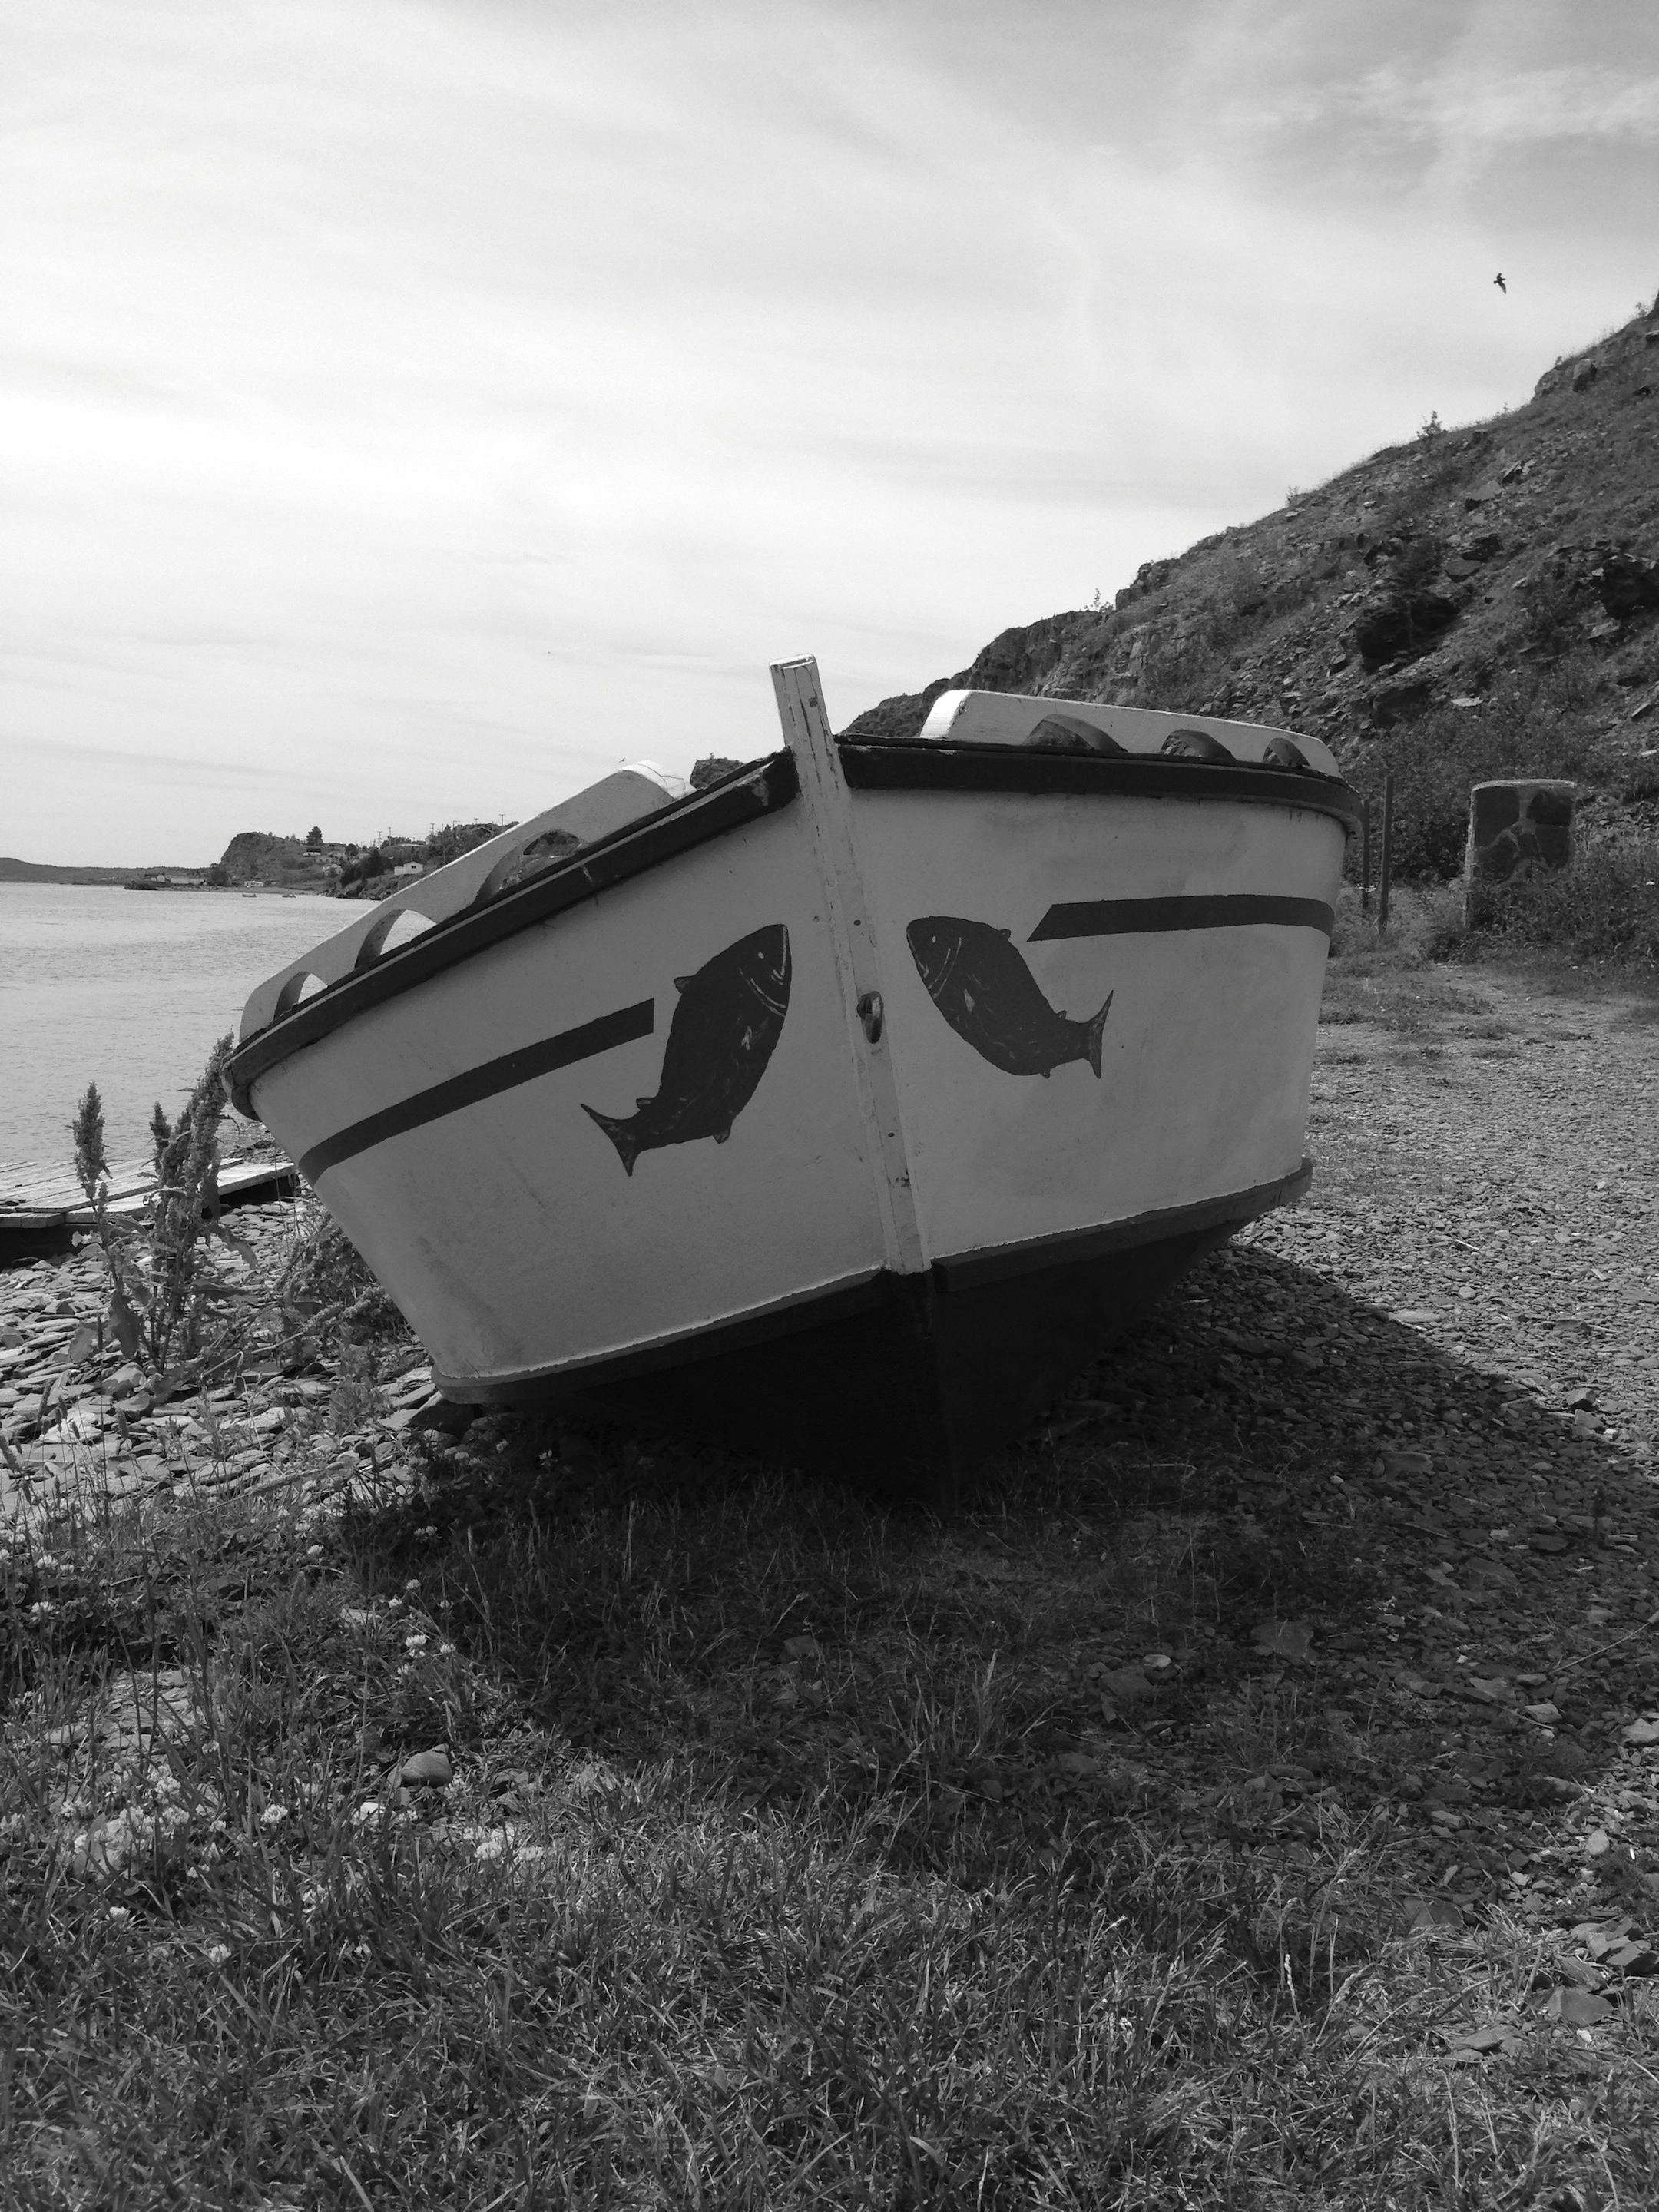 A Lifeboat, A Distraction, A Pause